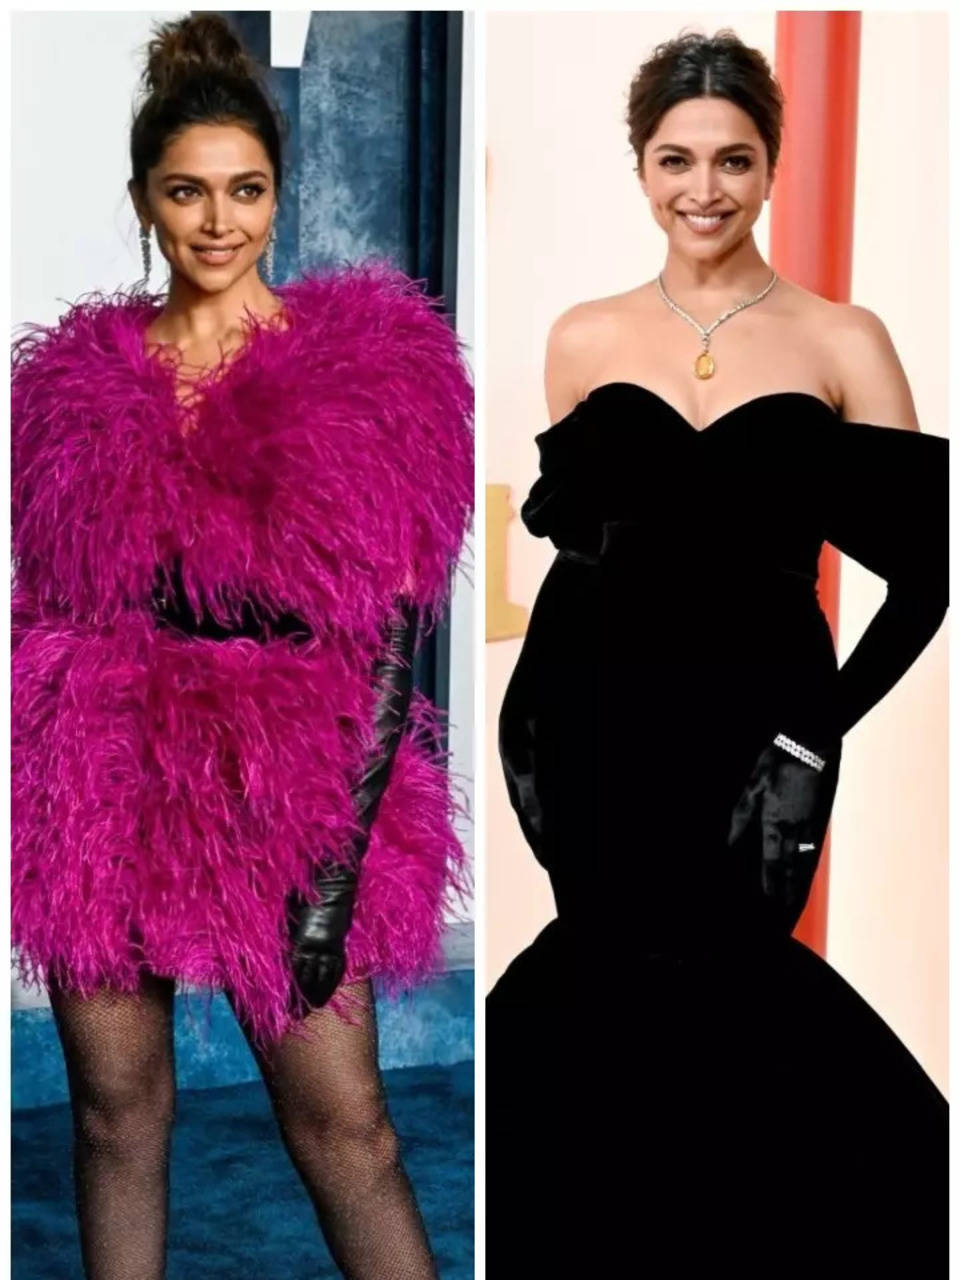 Deepika Padukone glams up in feathered dress with gloves for Oscars  after-party - India Today